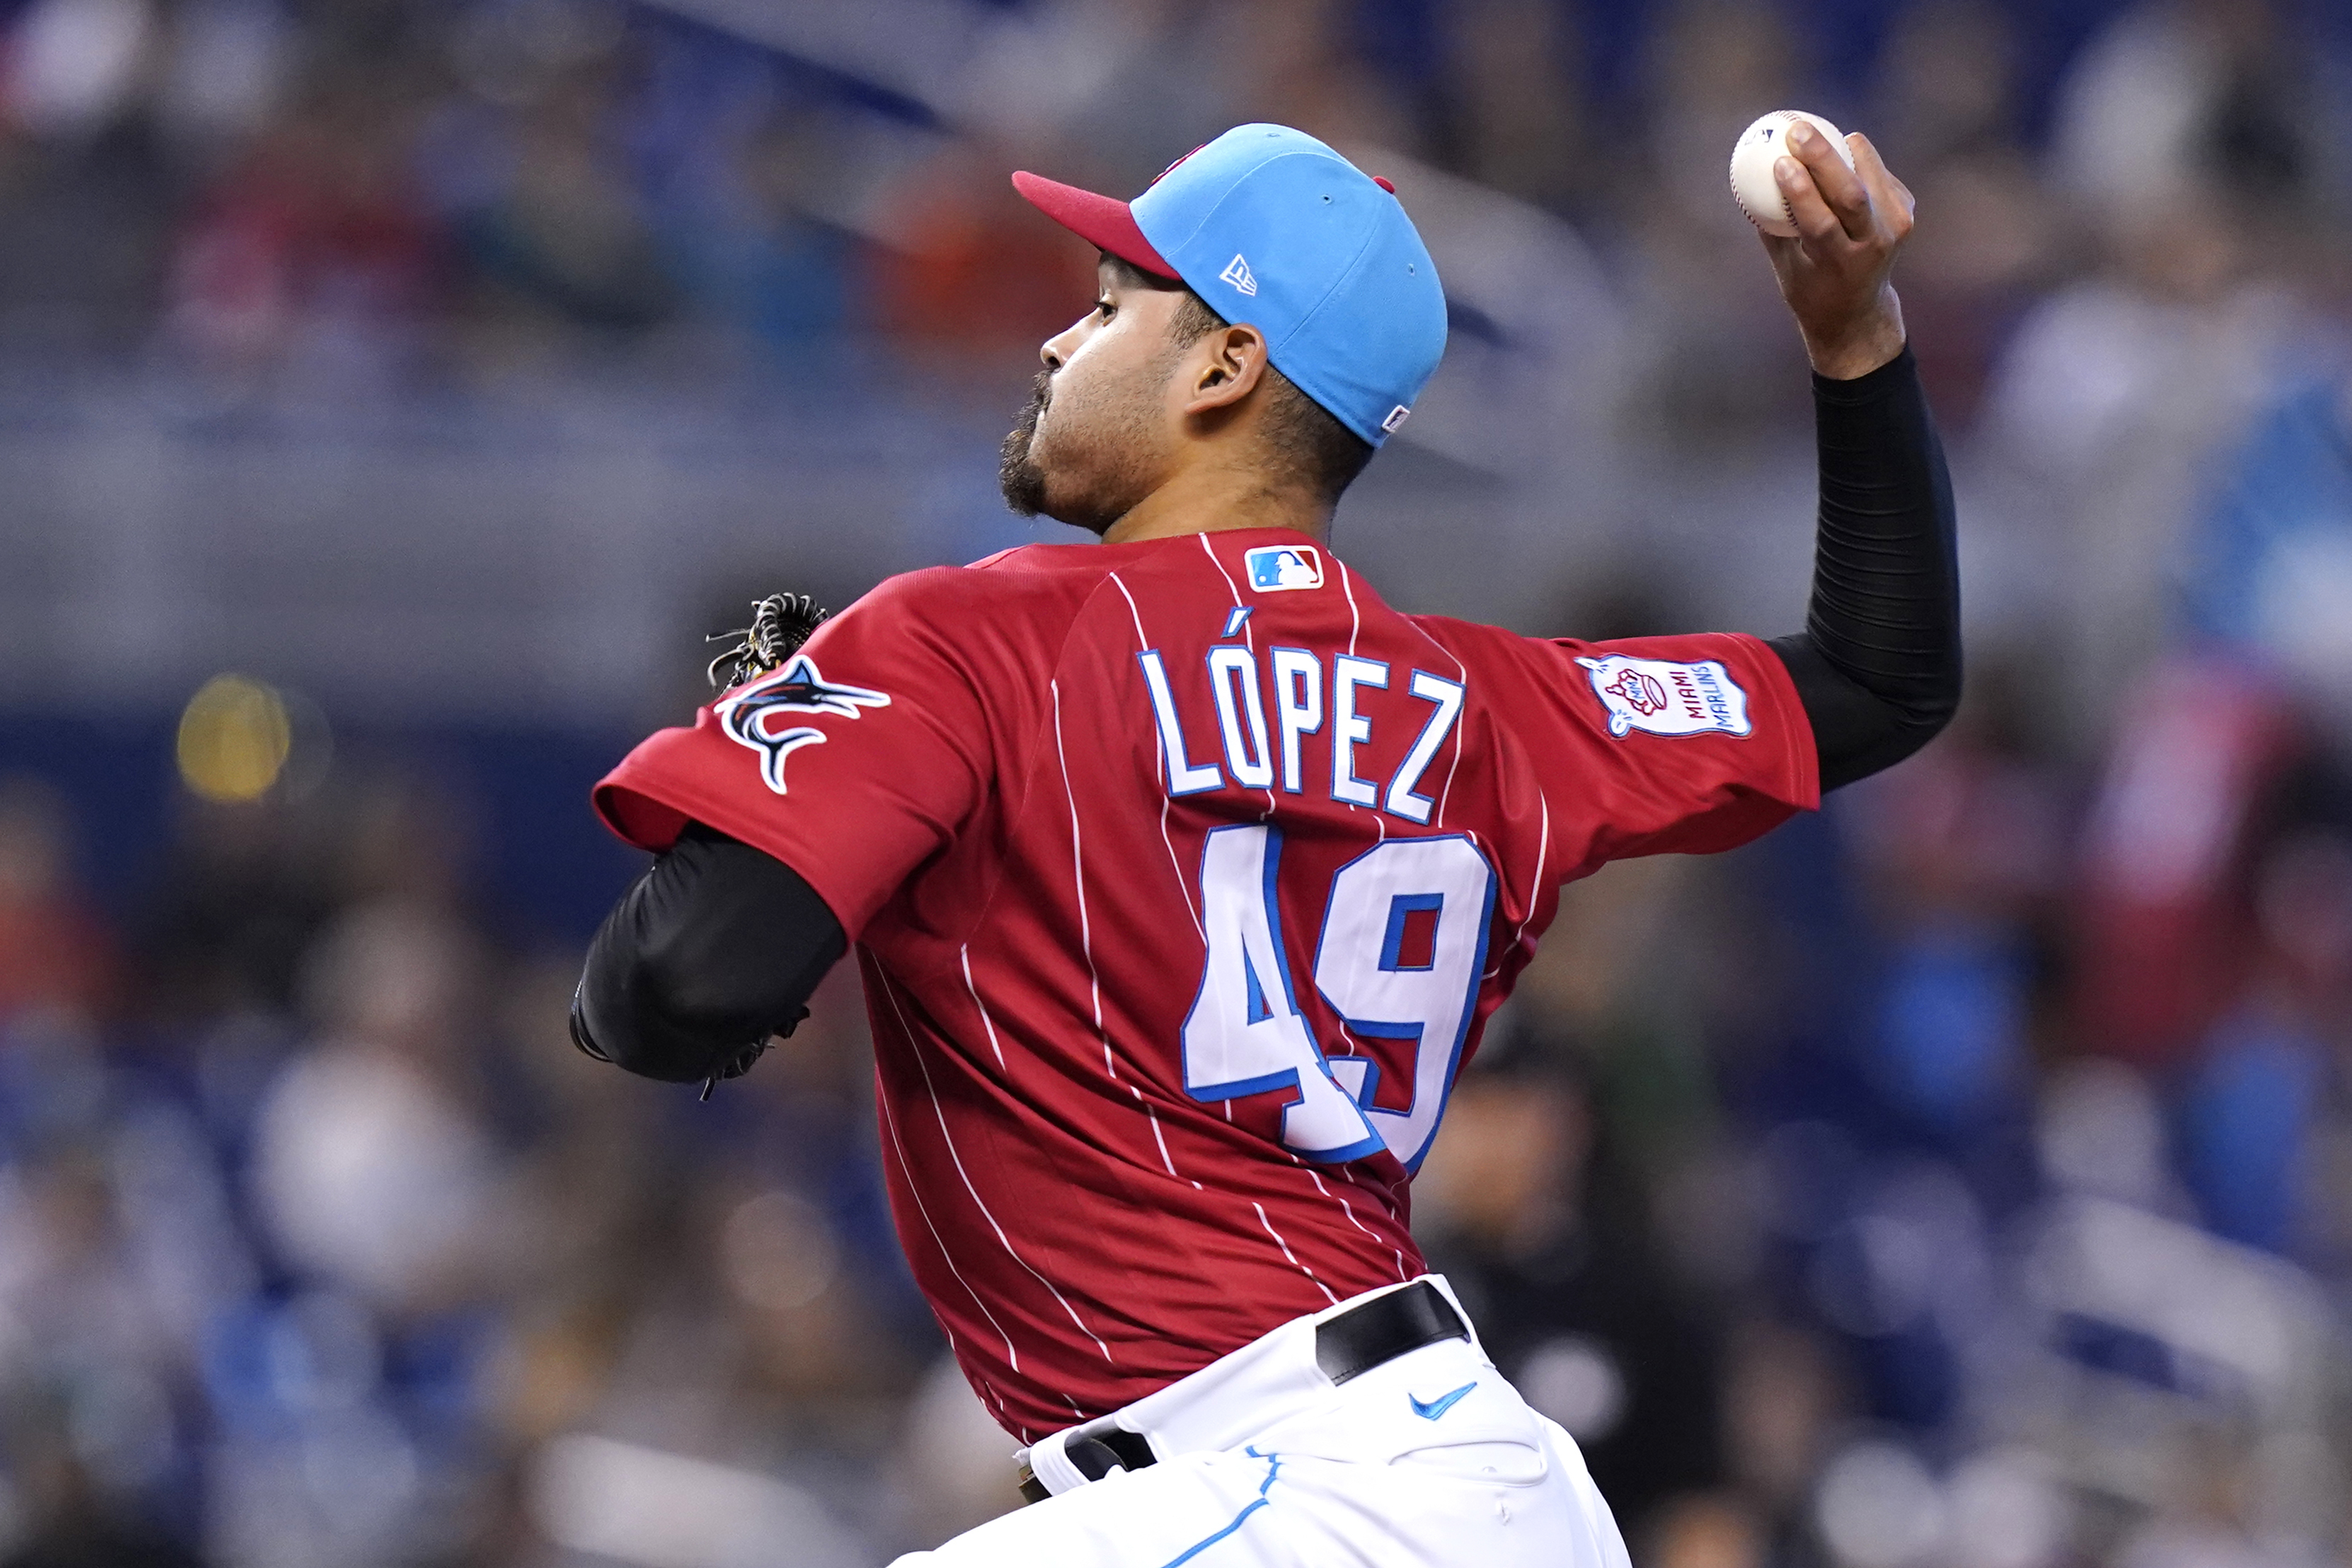 Marlins' López sets MLB mark with 9 strikeouts to open game